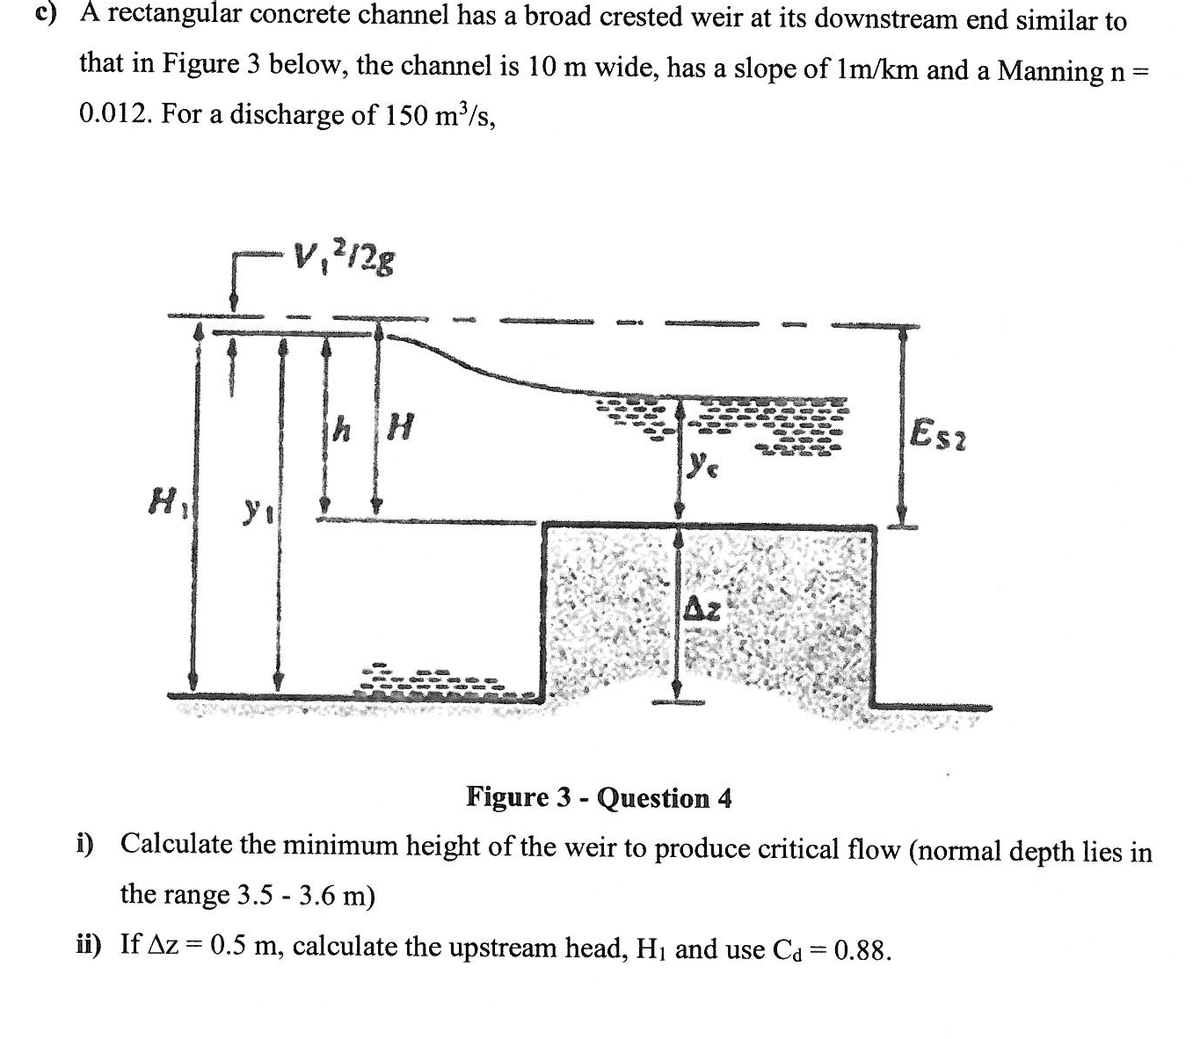 c) A rectangular concrete channel has a broad crested weir at its downstream end similar to
that in Figure 3 below, the channel is 10 m wide, has a slope of Im/km and a Manning n=
0.012. For a discharge of 150 m³/s,
Esz
Hi yı
Figure 3 - Question 4
i) Calculate the minimum height of the weir to produce critical flow (normal depth lies in
the range 3.5 - 3.6 m)
ii) If Az = 0.5 m, calculate the upstream head, H1 and use Ca = 0.88.
